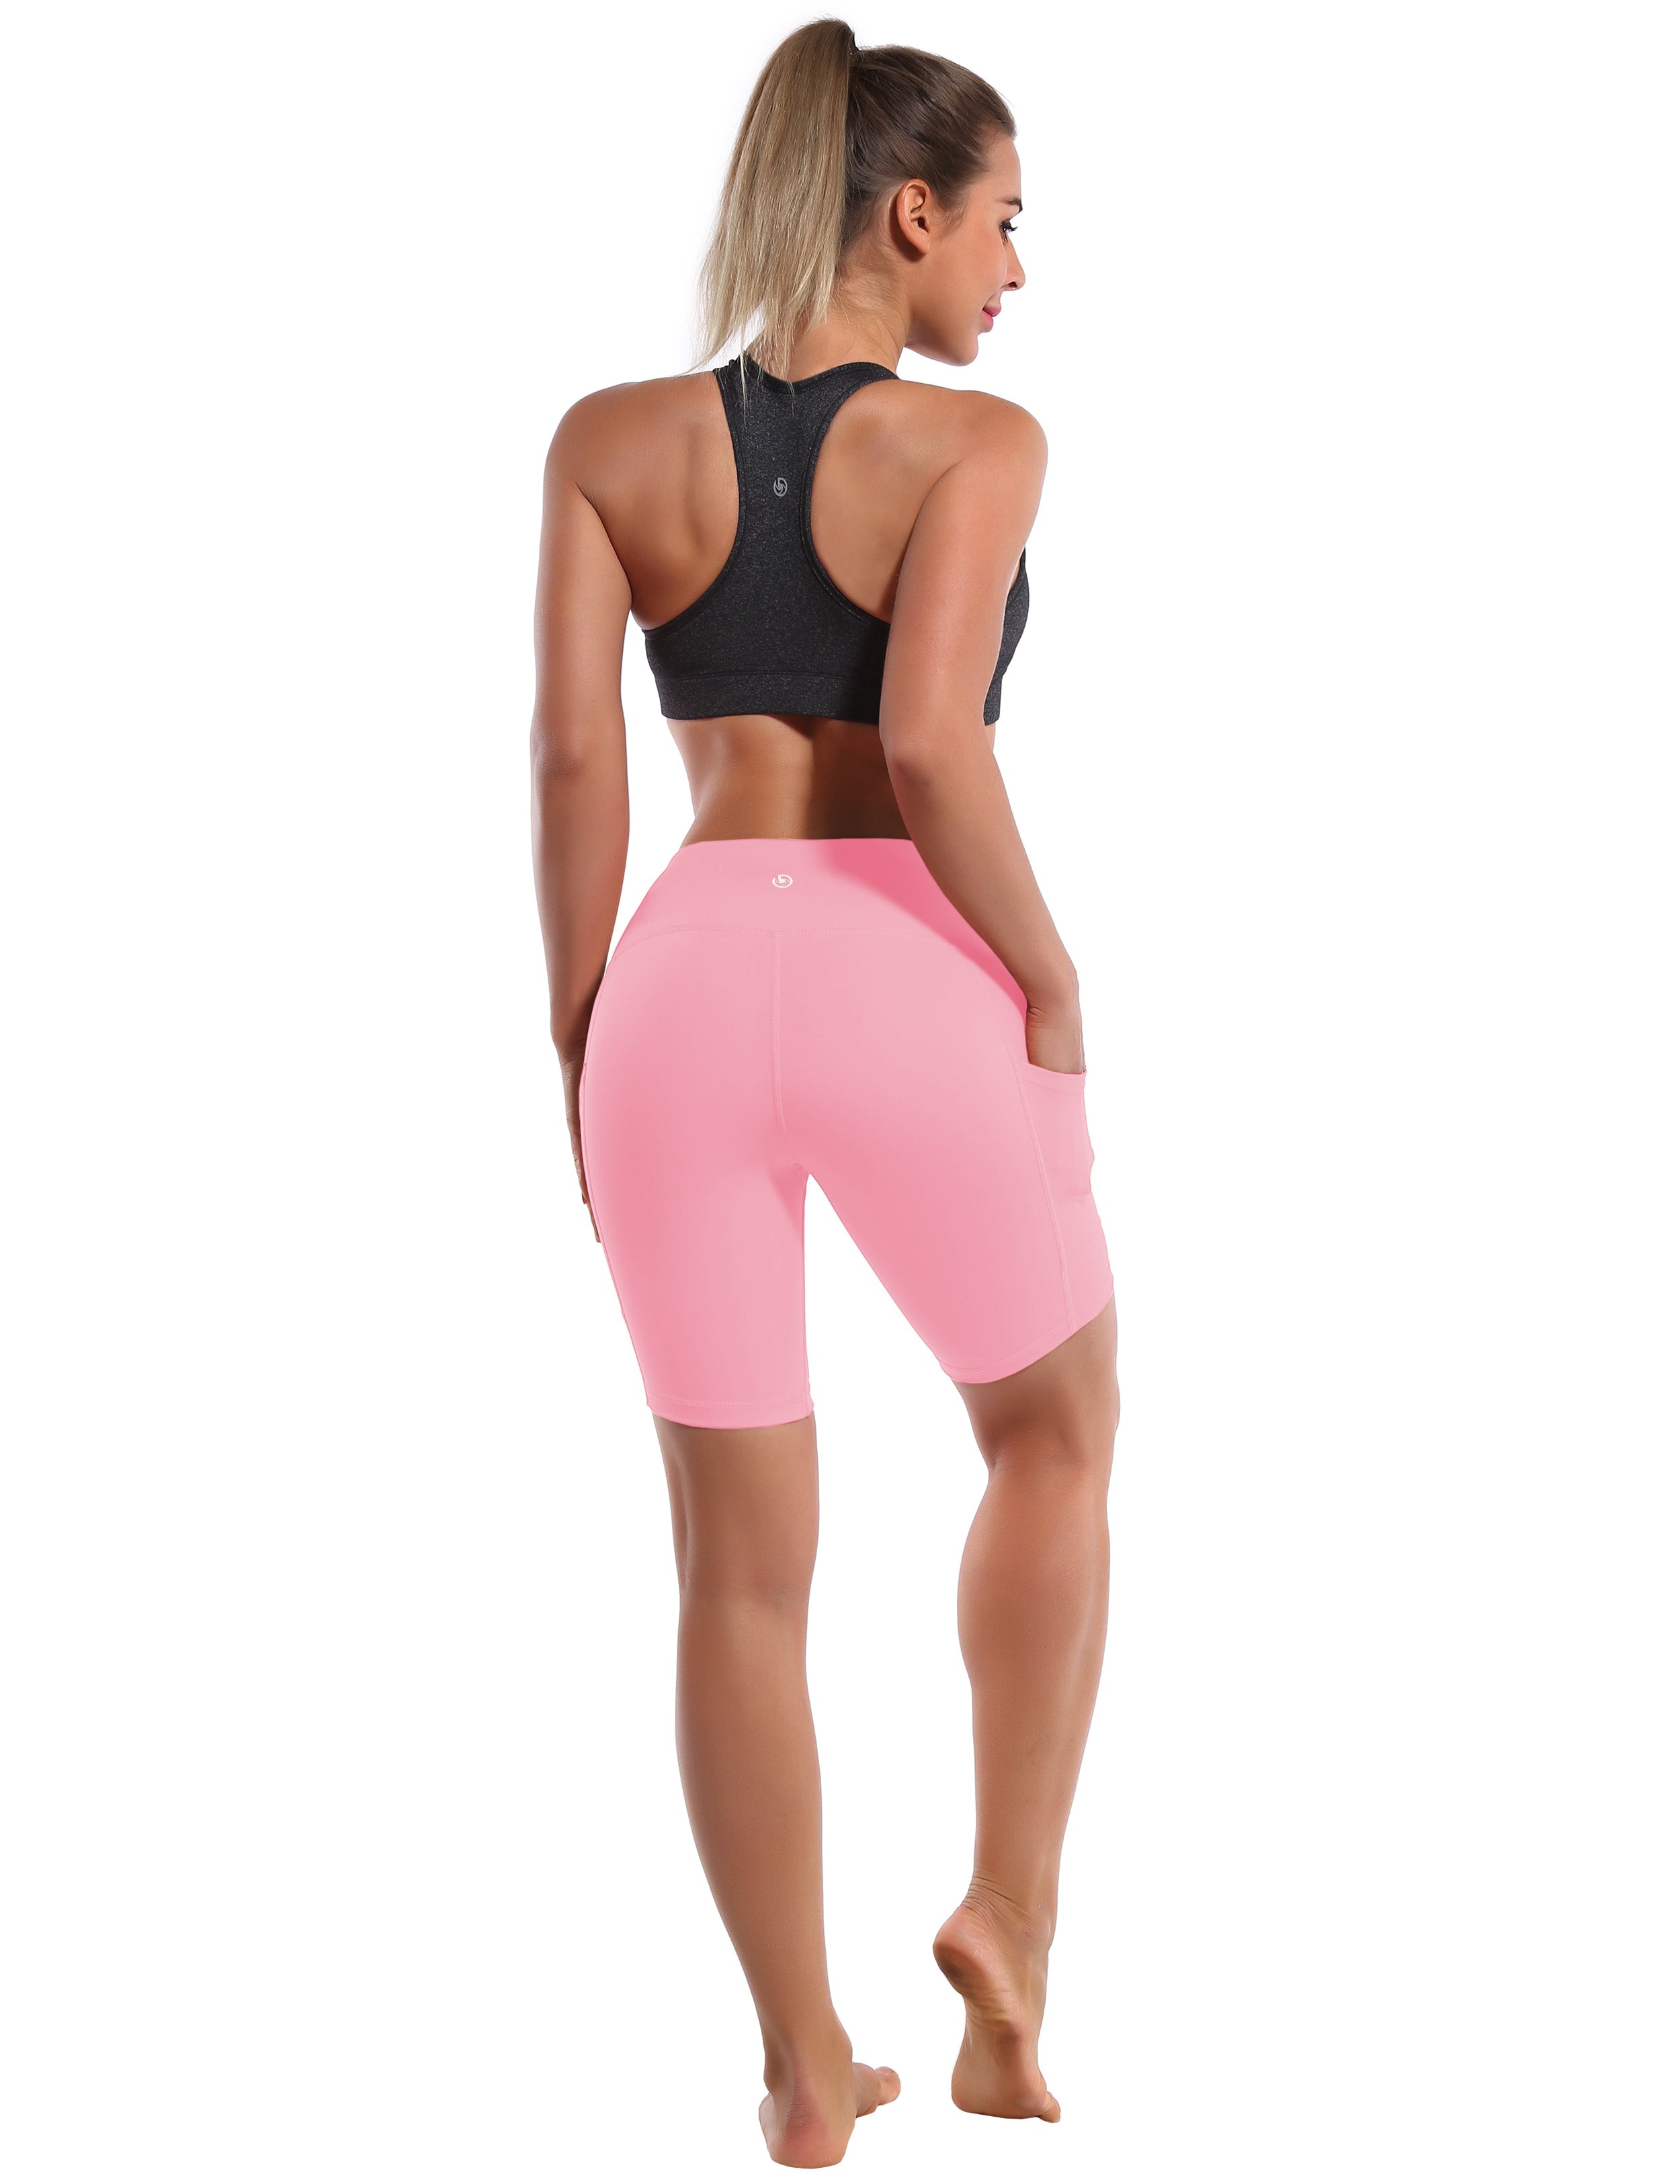 8" Side Pockets Golf Shorts lemonadepink Sleek, soft, smooth and totally comfortable: our newest style is here. Softest-ever fabric High elasticity High density 4-way stretch Fabric doesn't attract lint easily No see-through Moisture-wicking Machine wash 75% Nylon, 25% Spandex